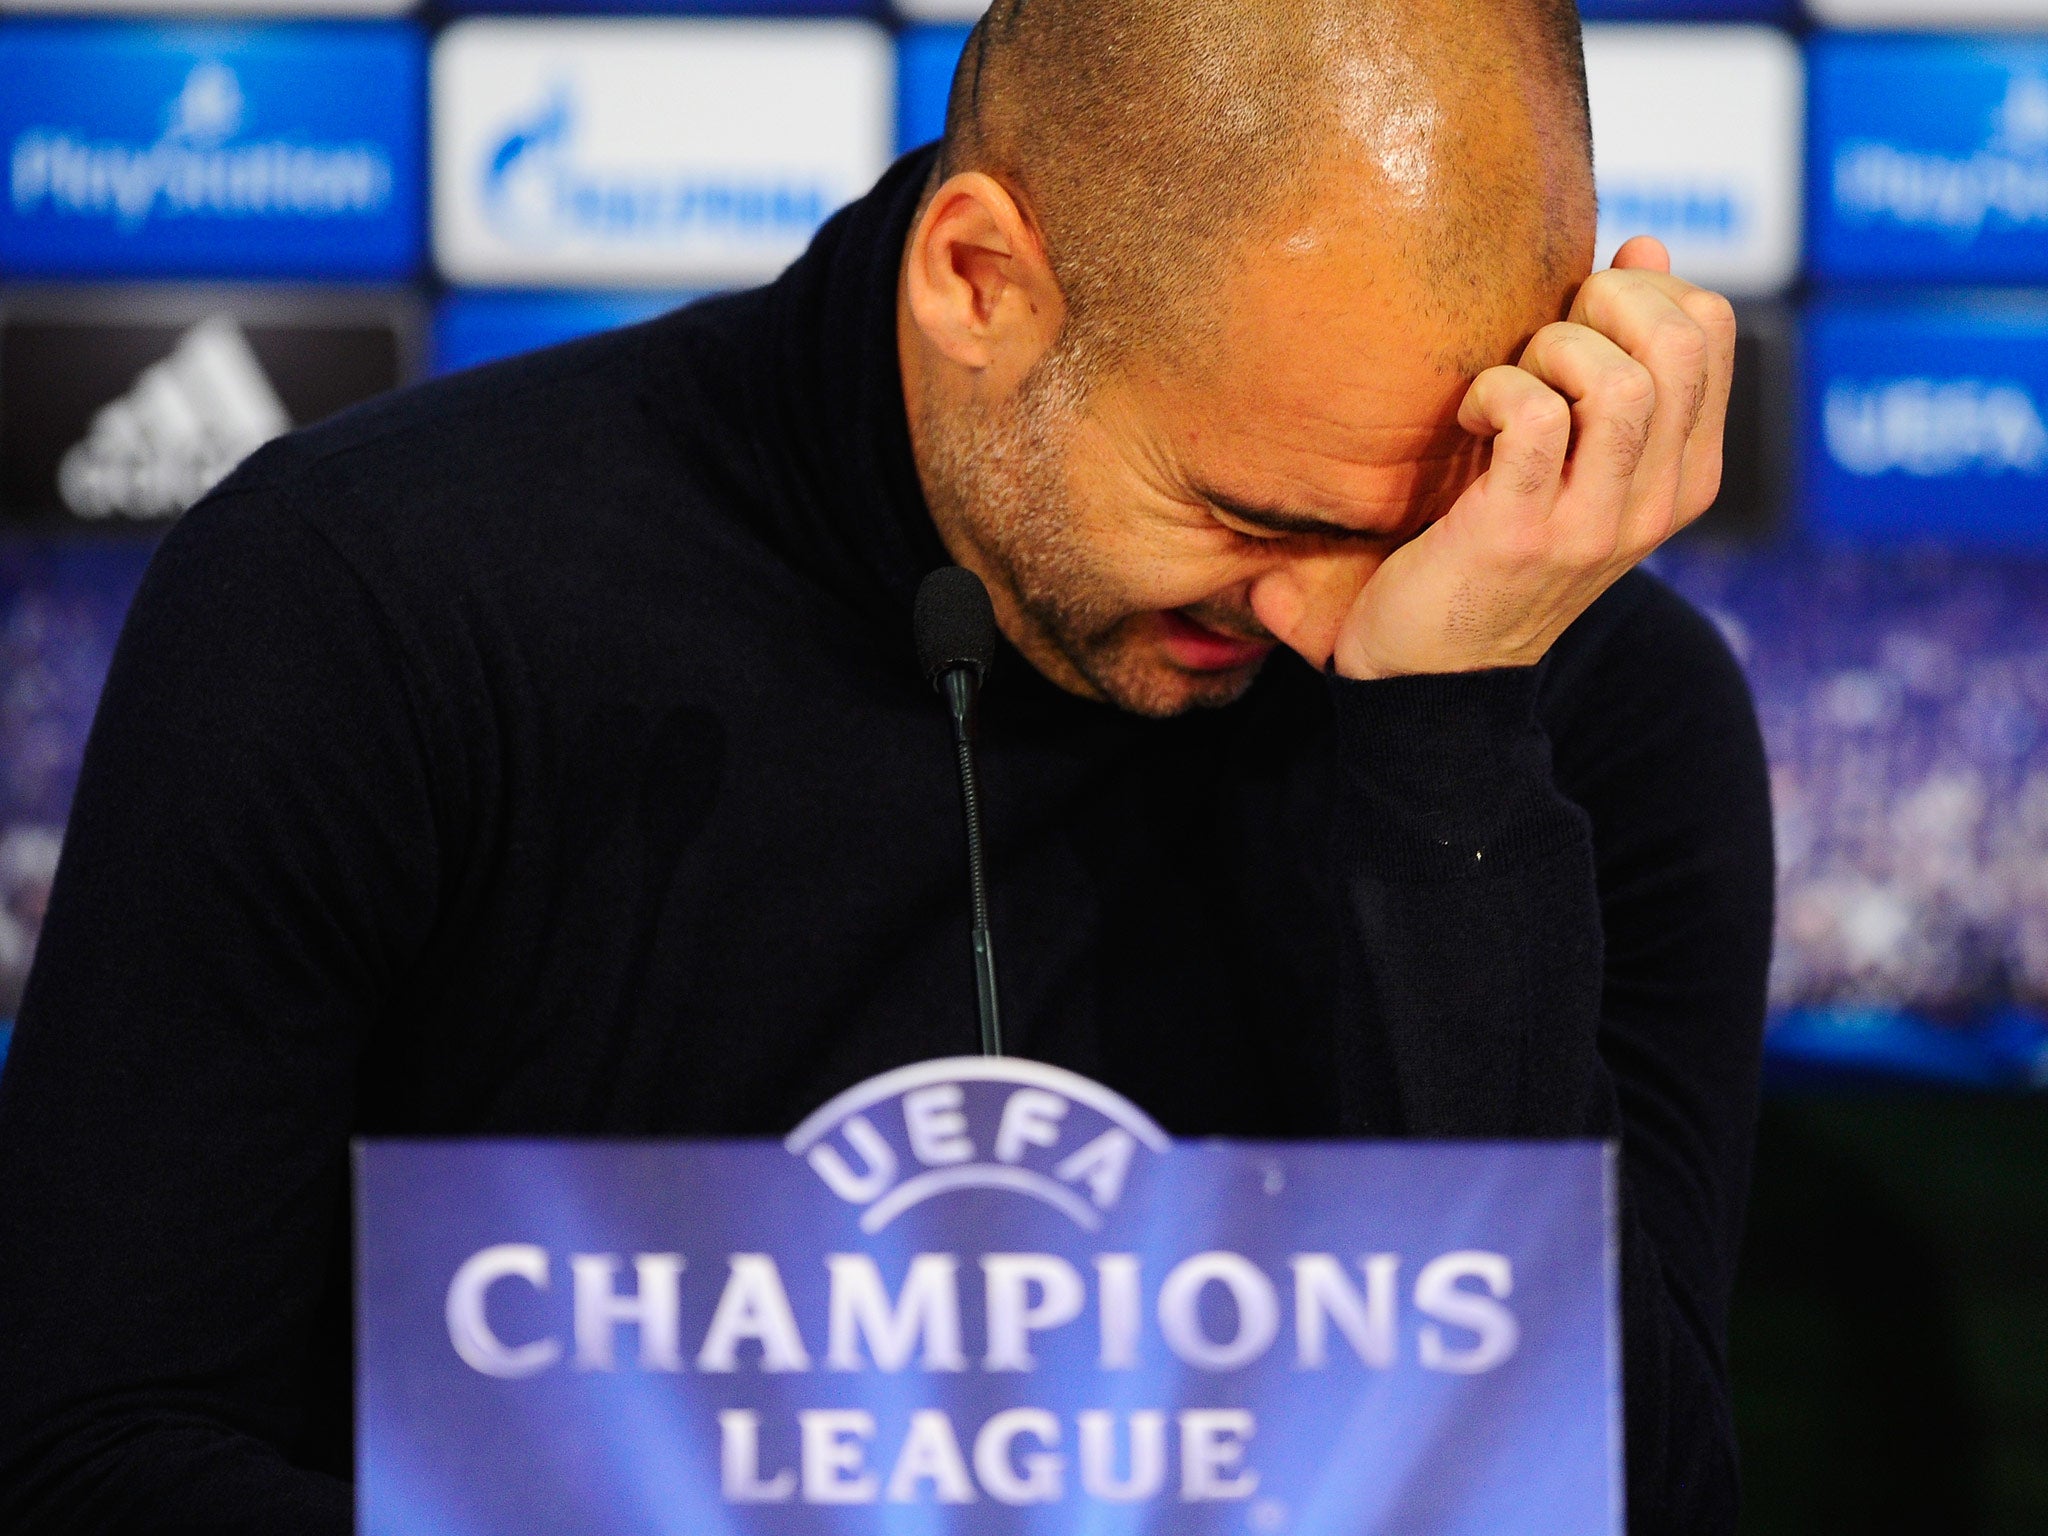 Pep Guardiola talks to the media ahead of Bayern Munich's match with Manchester United